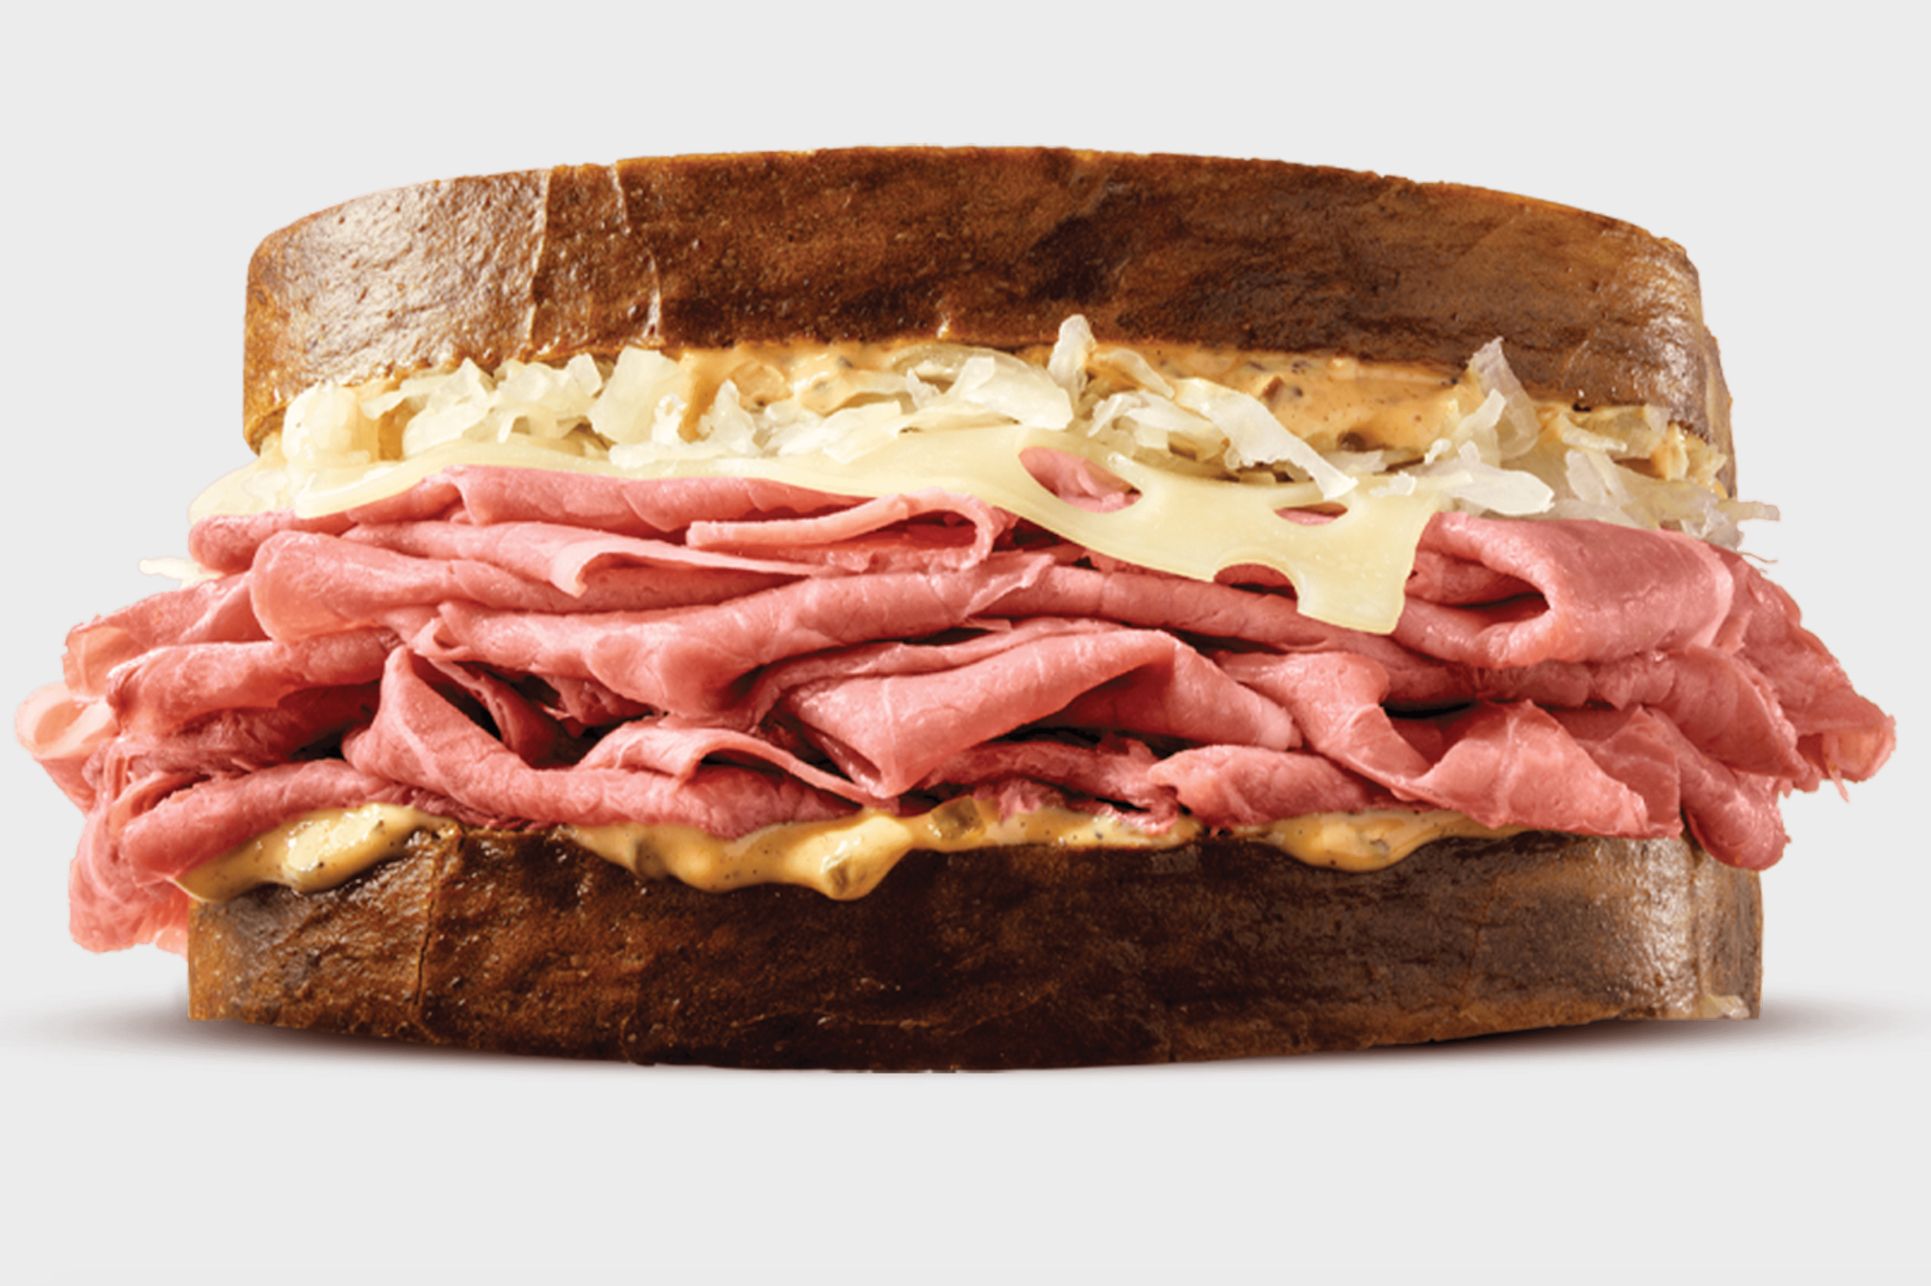 Arby’s Rolls Out the Double Stack Reuben Sandwich